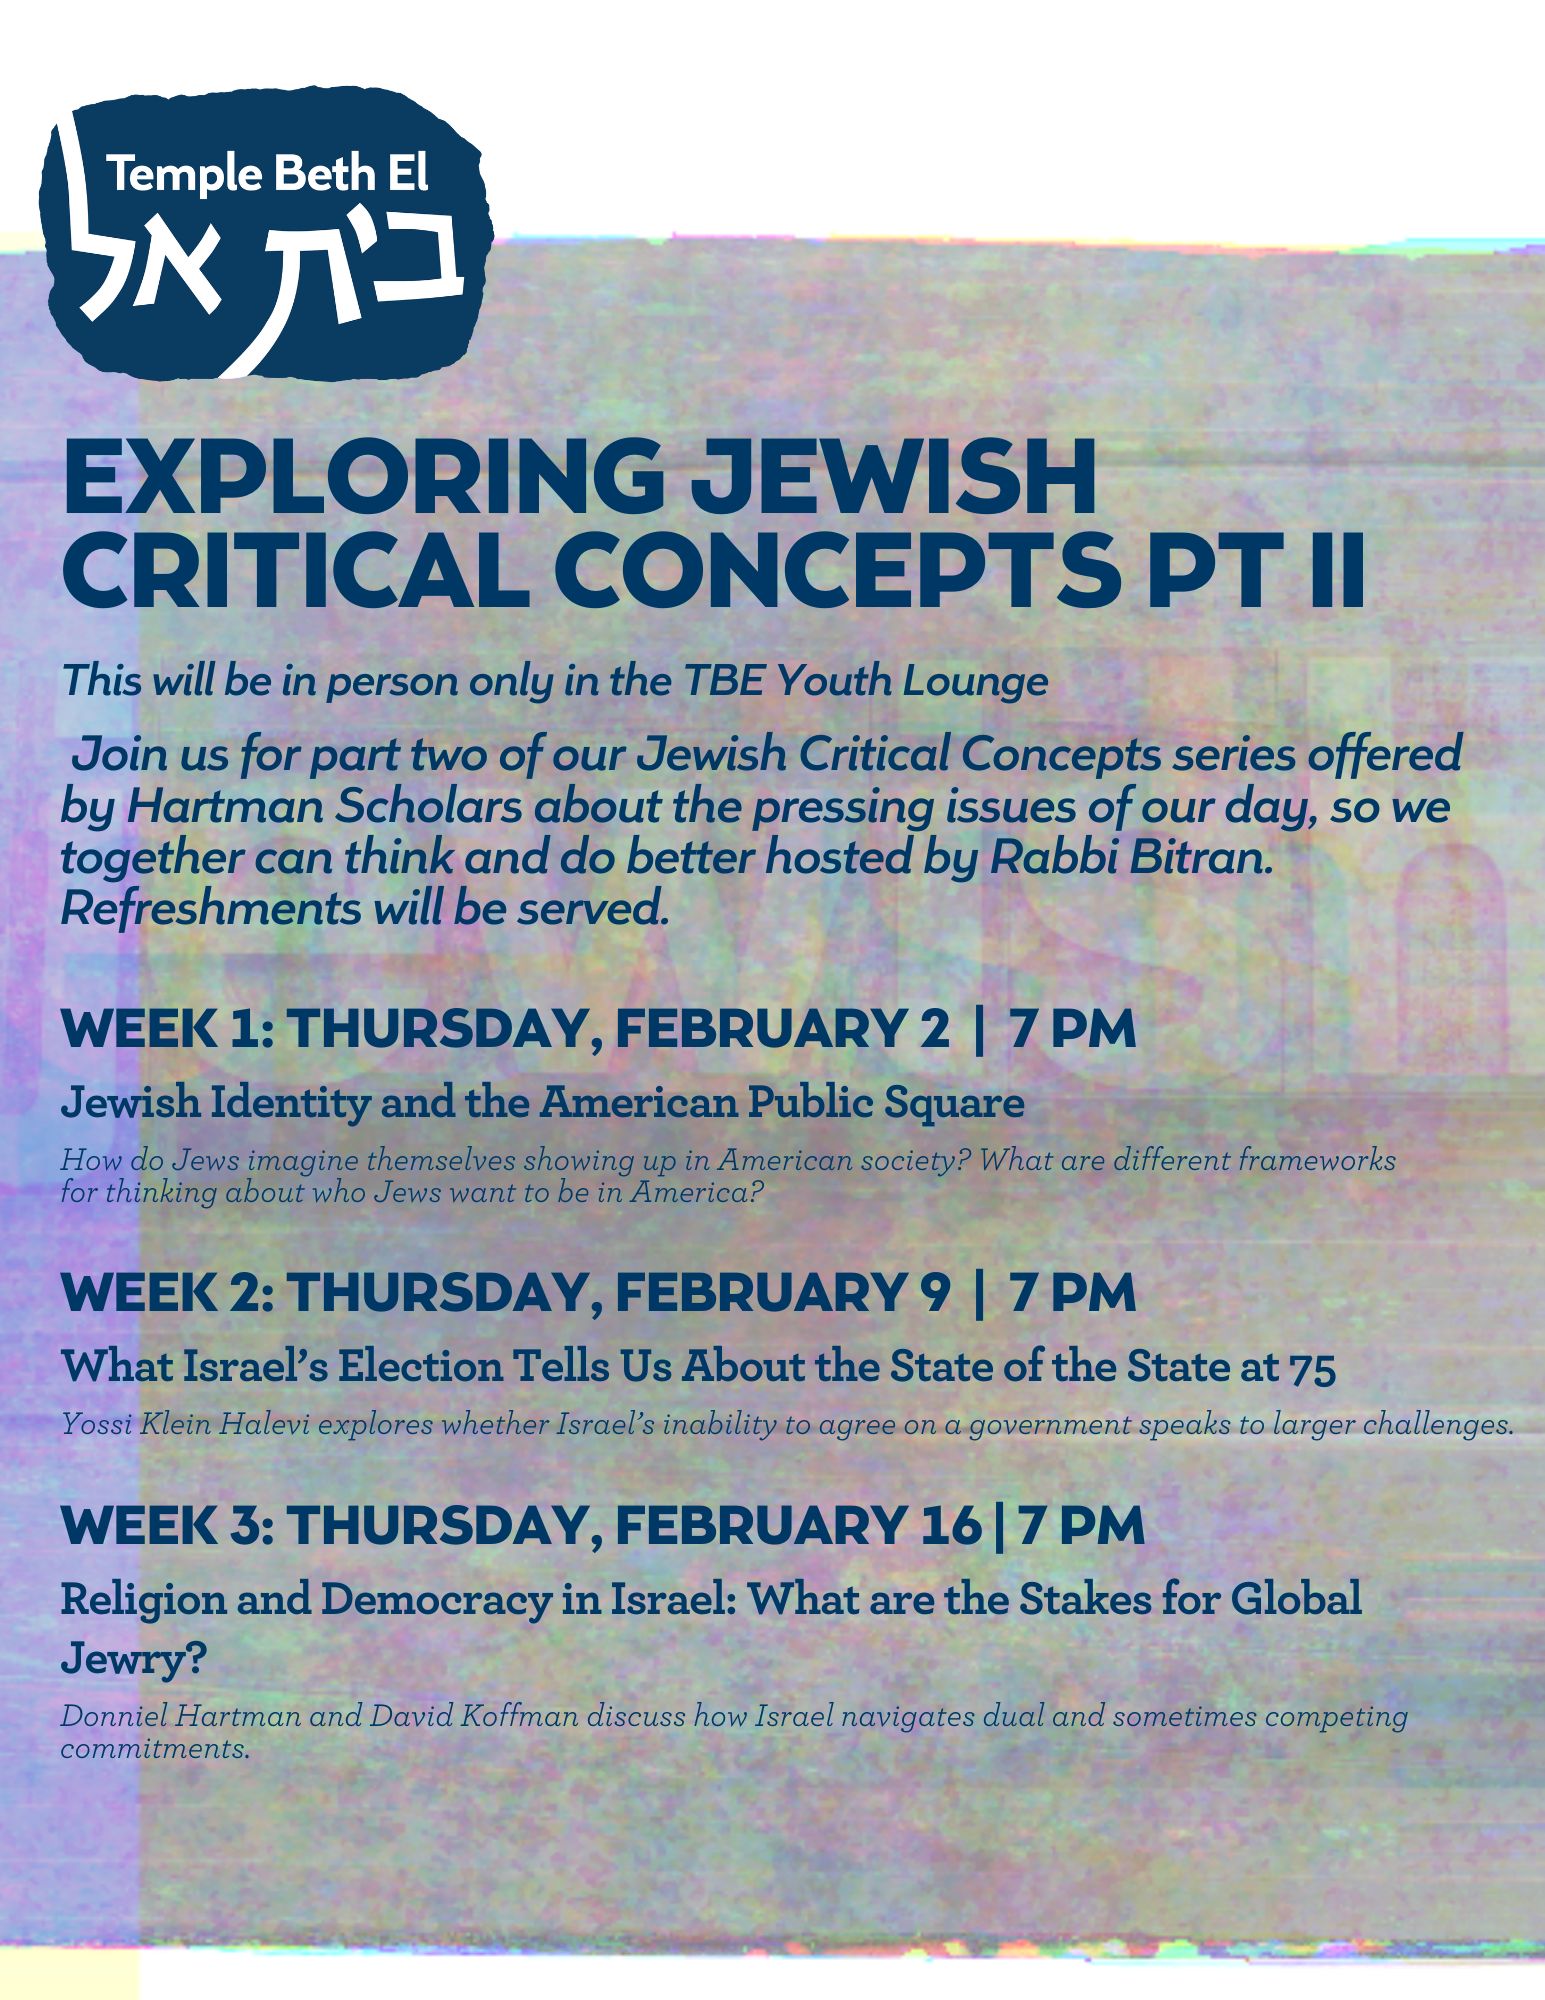 Exploring jewish critical concepts pt II : Religion and Democracy in Israel: What are the Stakes for Global Jewry?